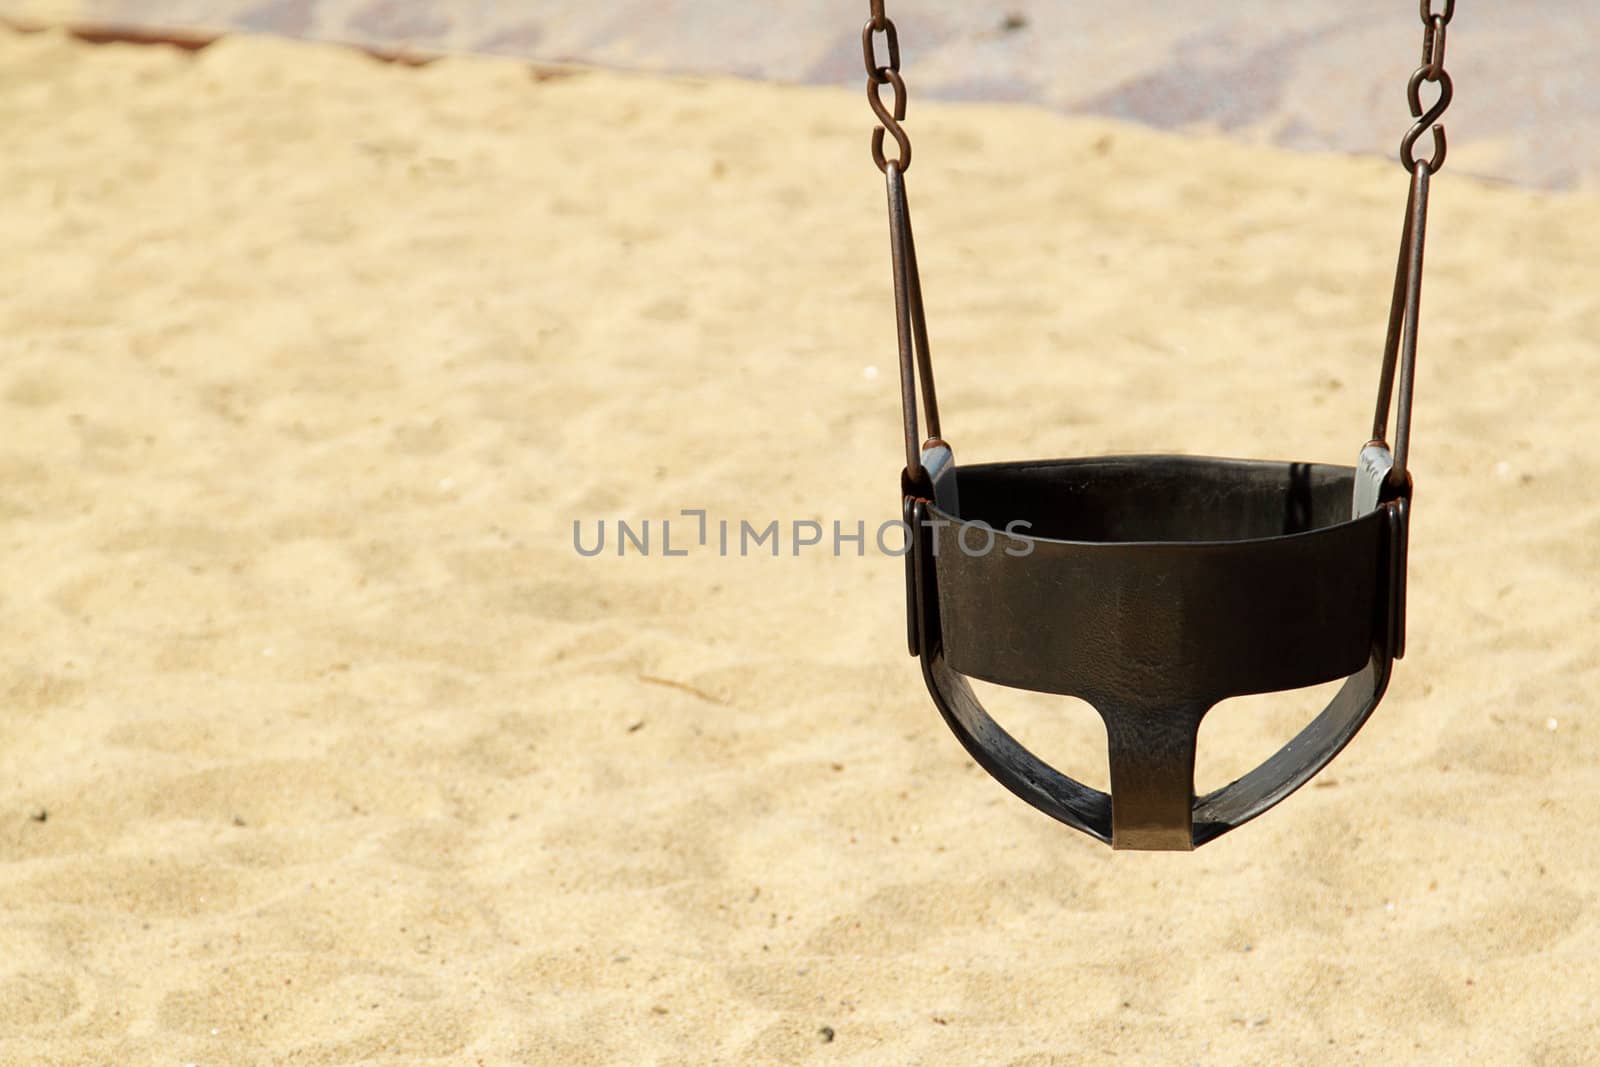 Black swing on the childrens playground with sand as a background on sunny day